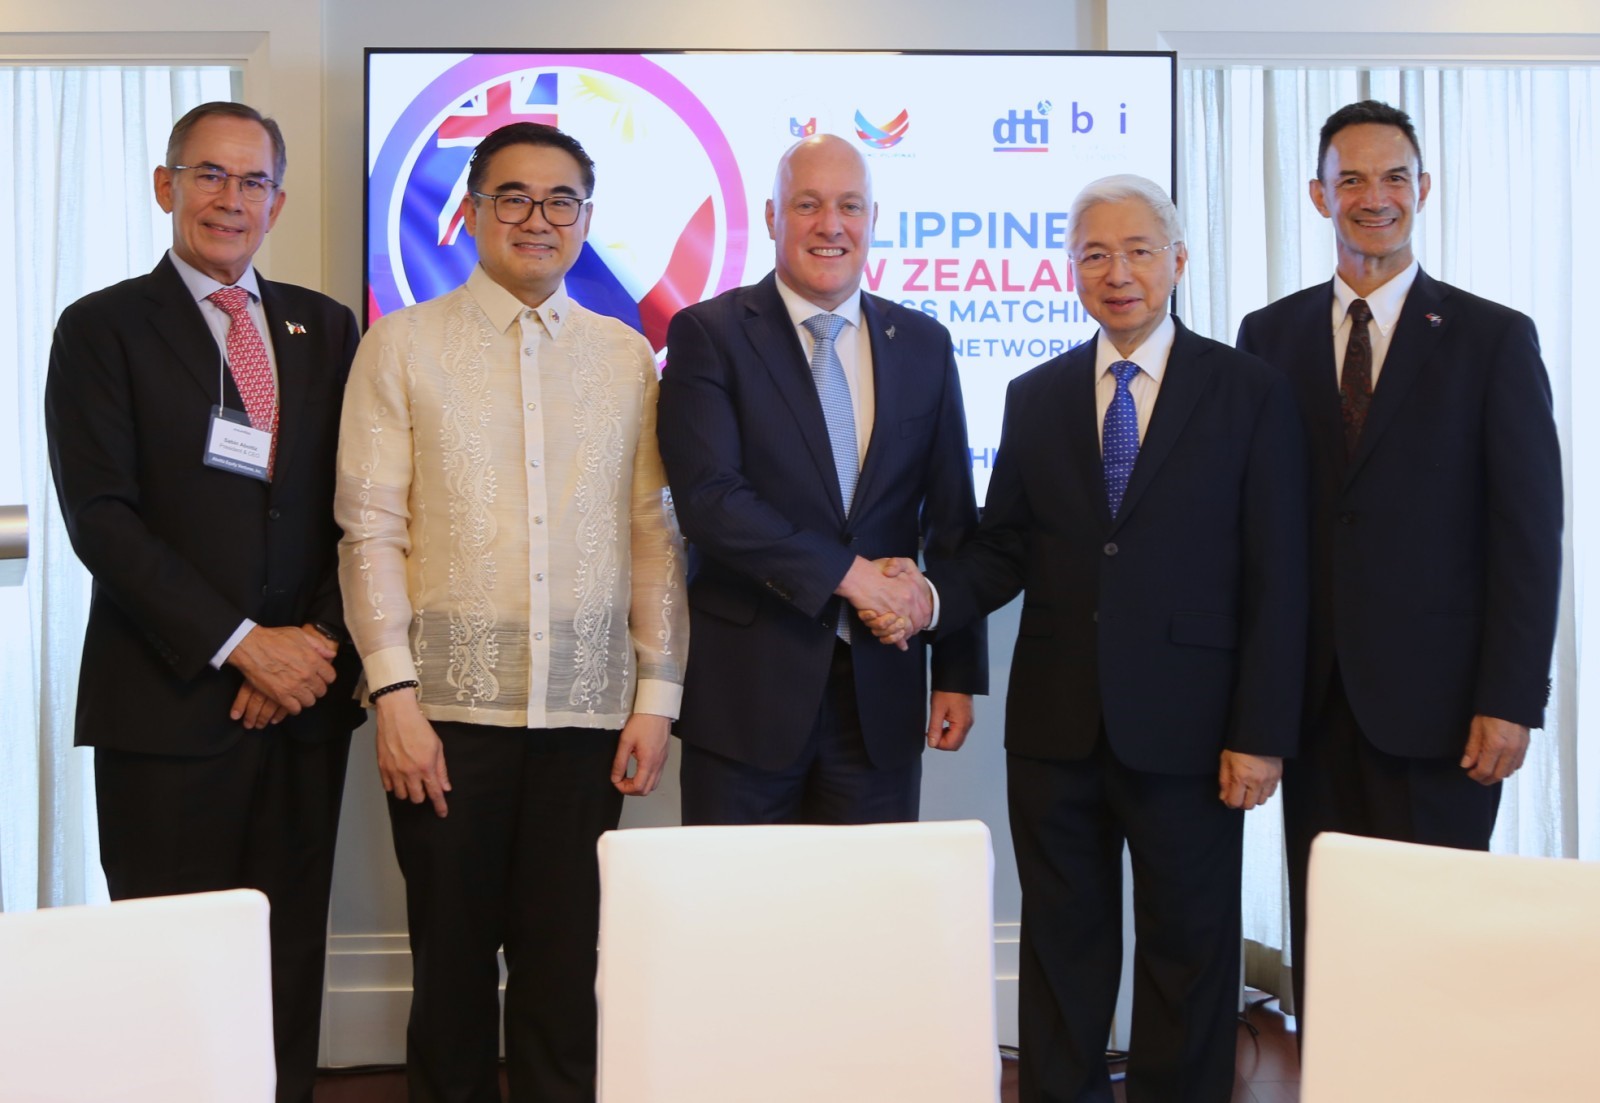 From L to R: Private Sector Advisory Council (PSAC) Strategic Lead Convenor Sabin Aboitiz, Special Assistant to the President for Investment and Economic Affairs Frederick Go, New Zealand Prime Minister Christopher Luxon, DTI Secretary Fred Pascual, New Zealand Ambassador to the Philippines Peter Kell